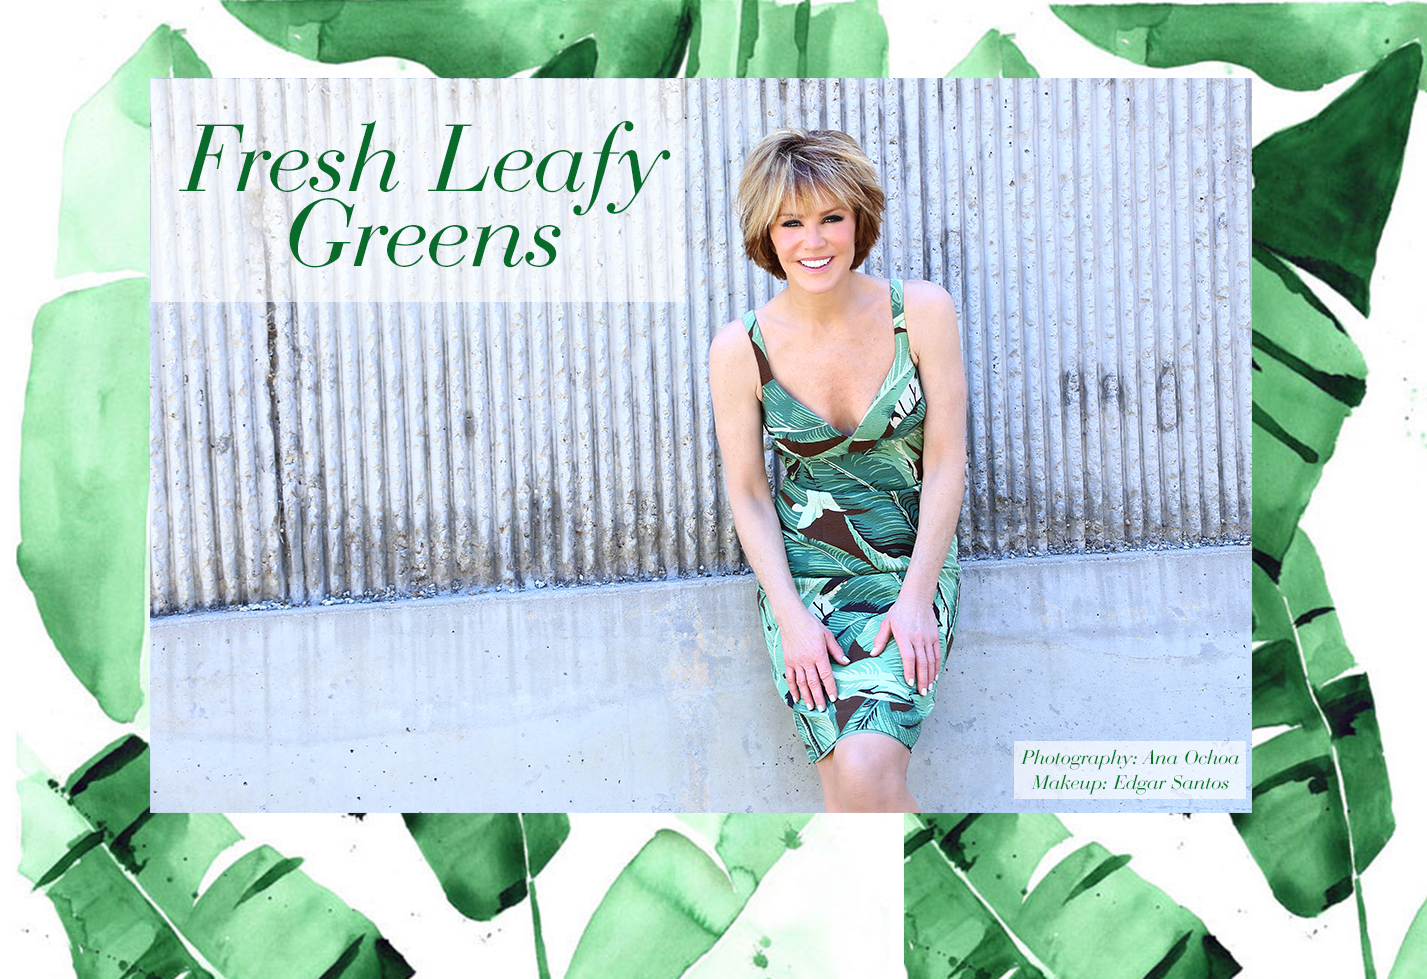 laura-leafy-greens-title